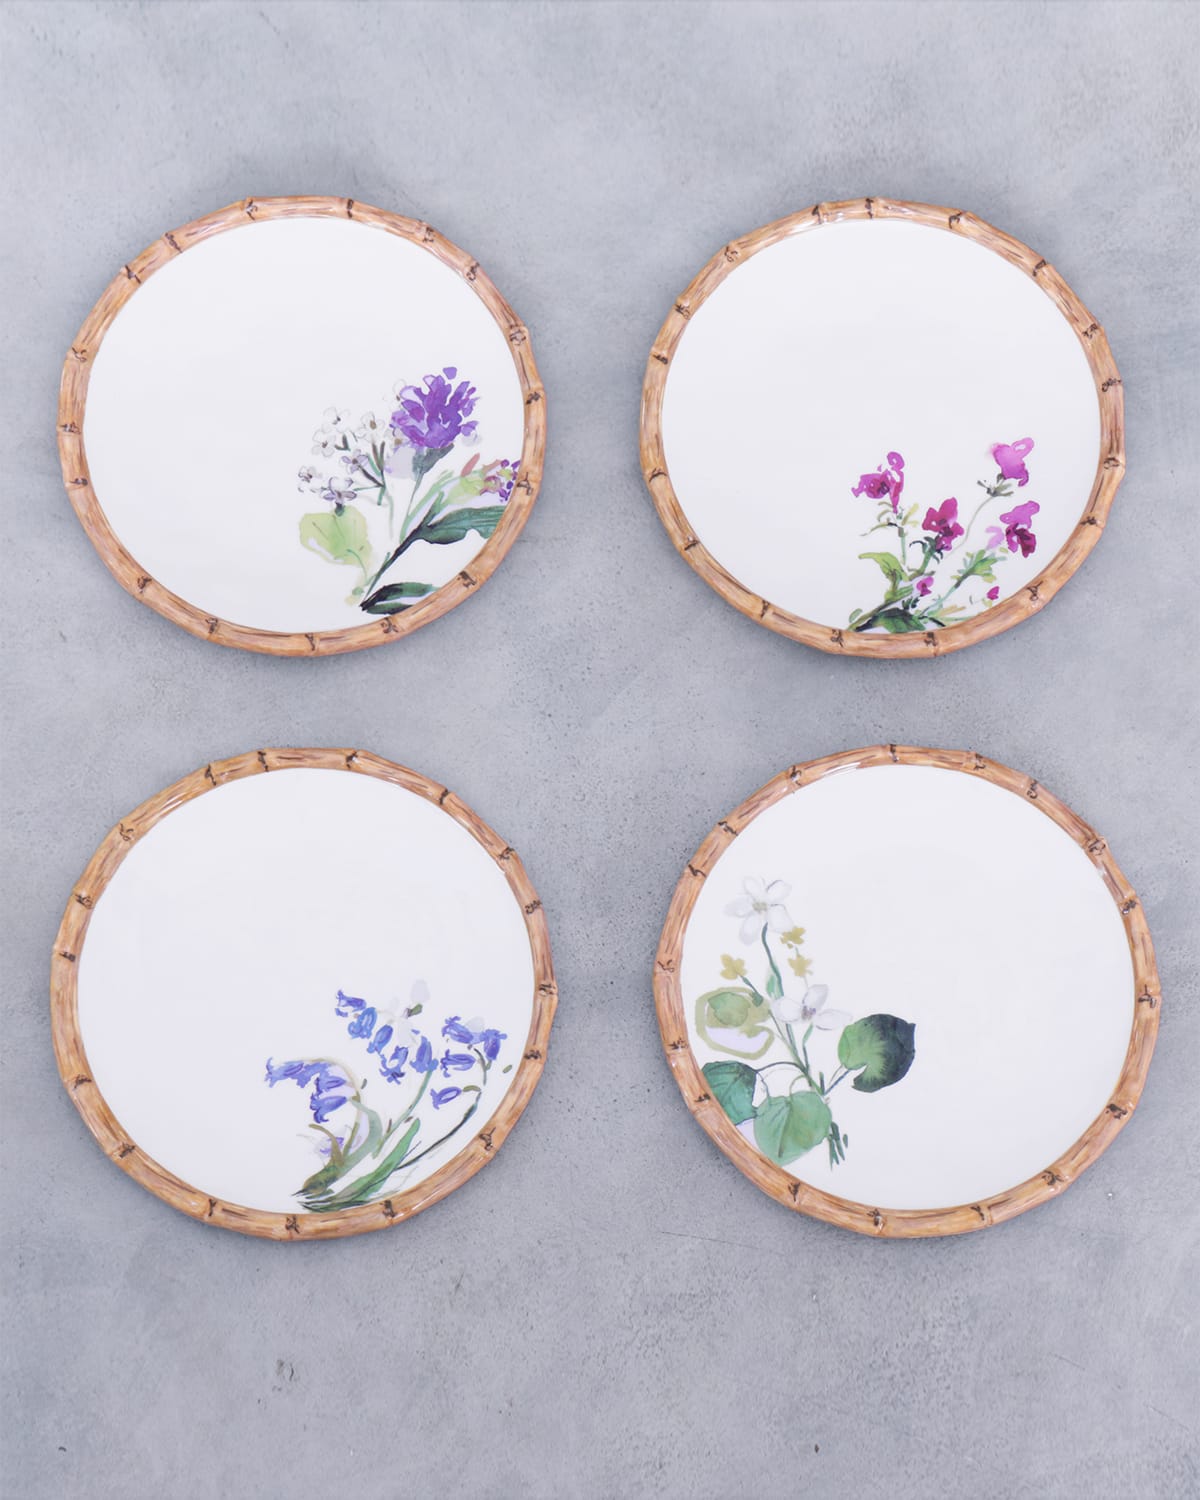 VIDA Bamboo Floral Salad Plates, Set of 4 (White and Multi)